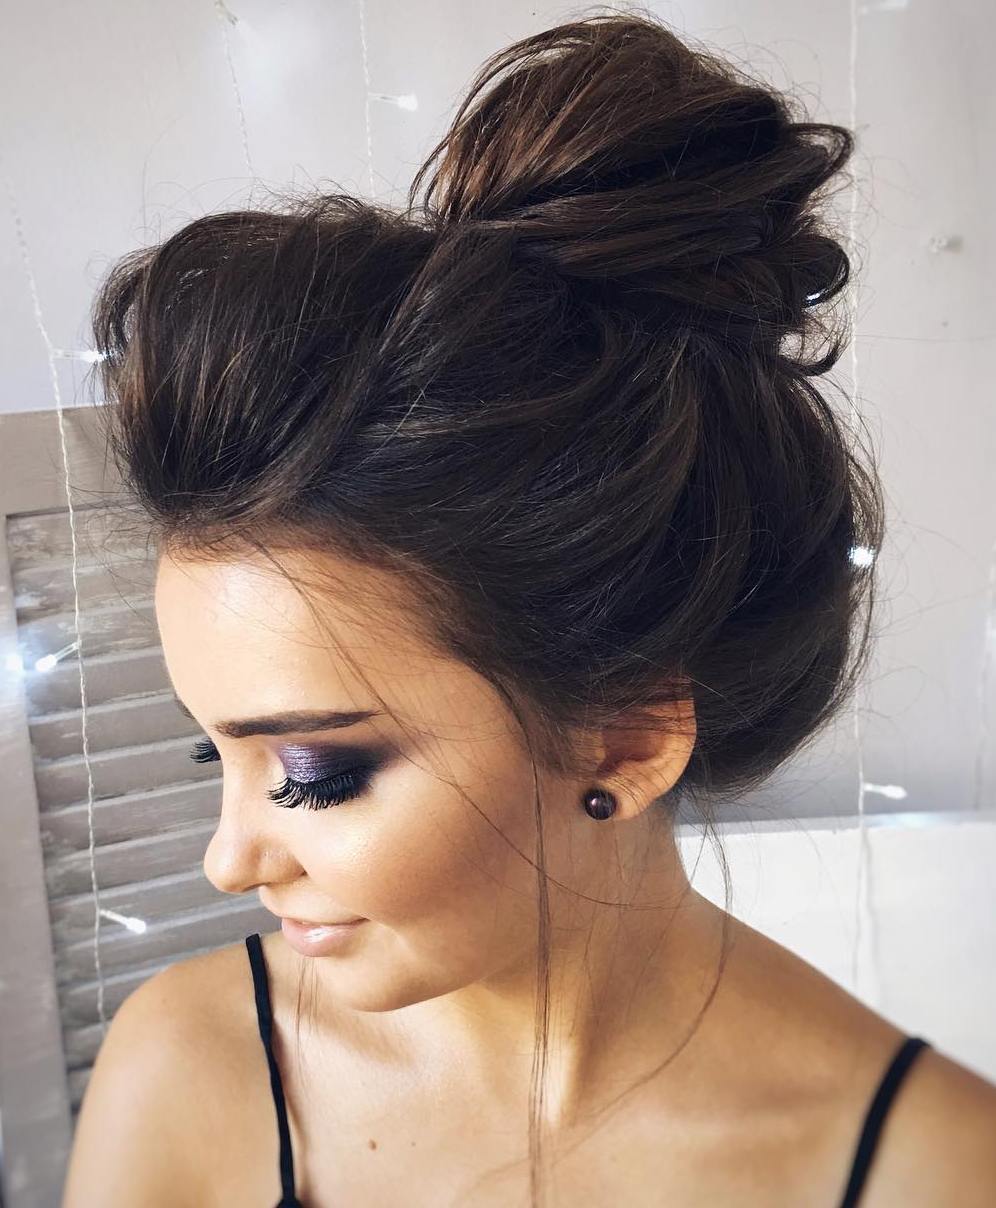 Messy Bun Guide: 40 Newest Messy Buns for 2019